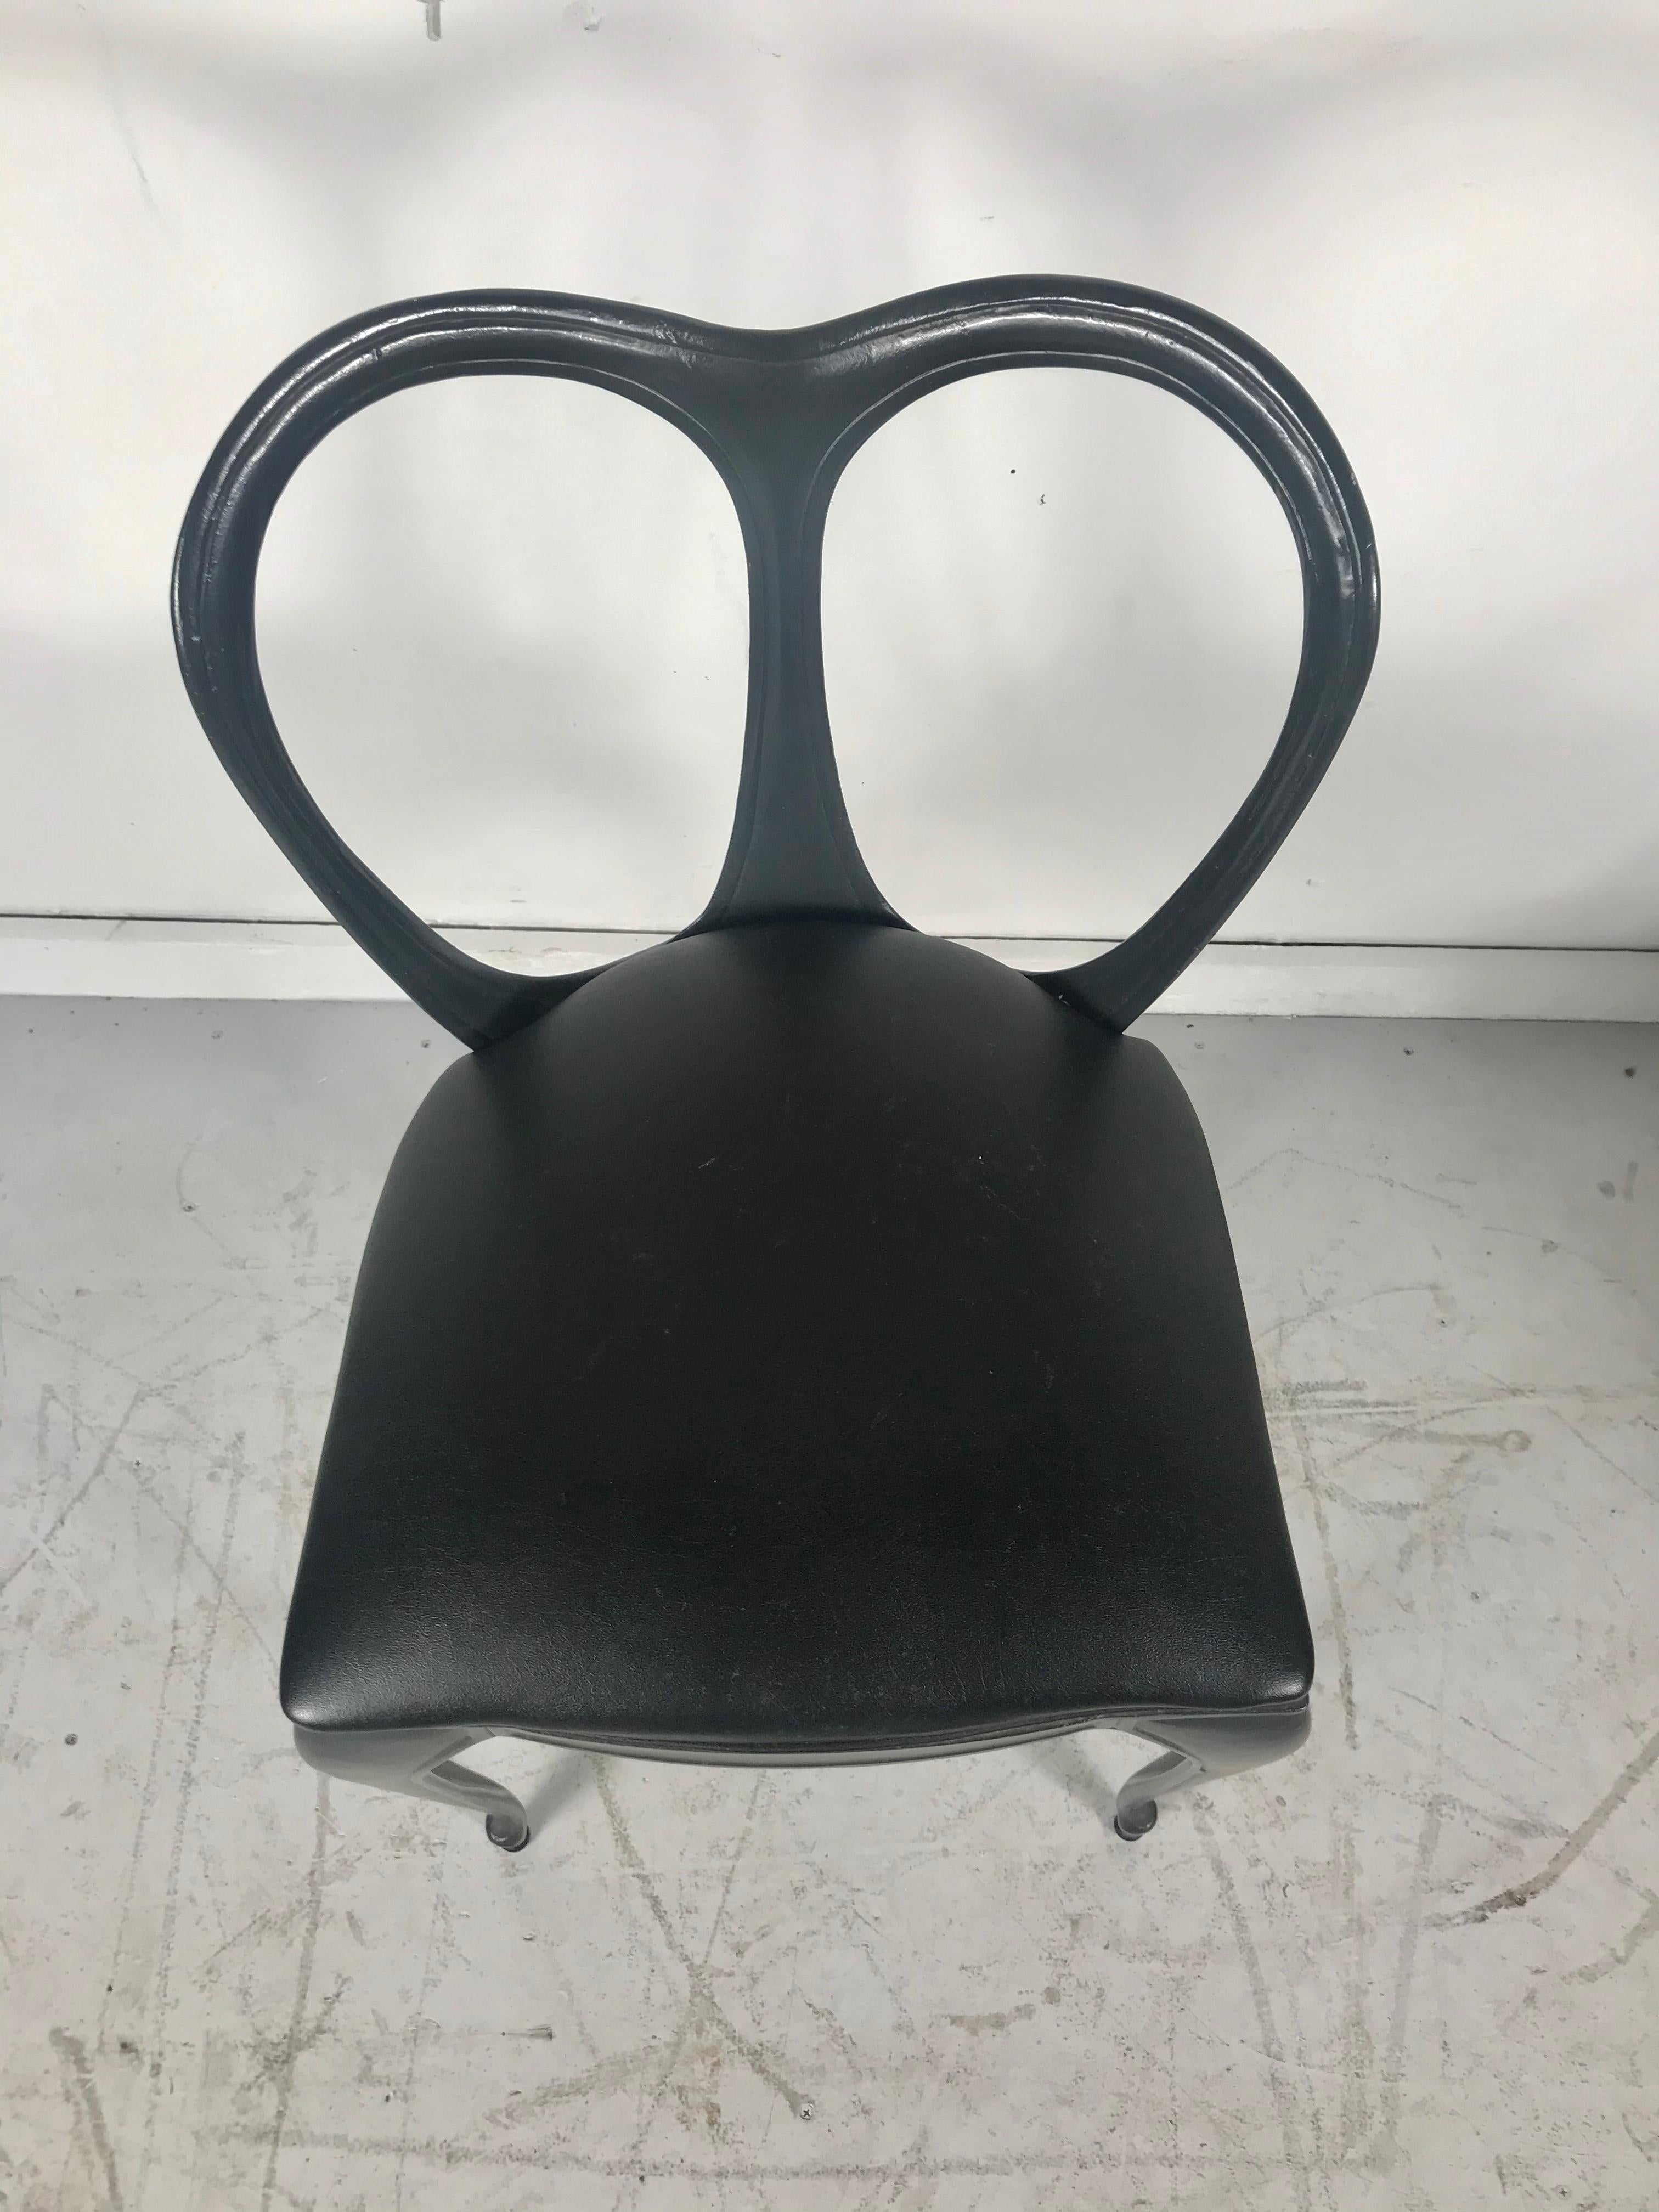 20th Century Art Nouveau Style Cast Aluminum Chair by Crucible Products Corp. 1960